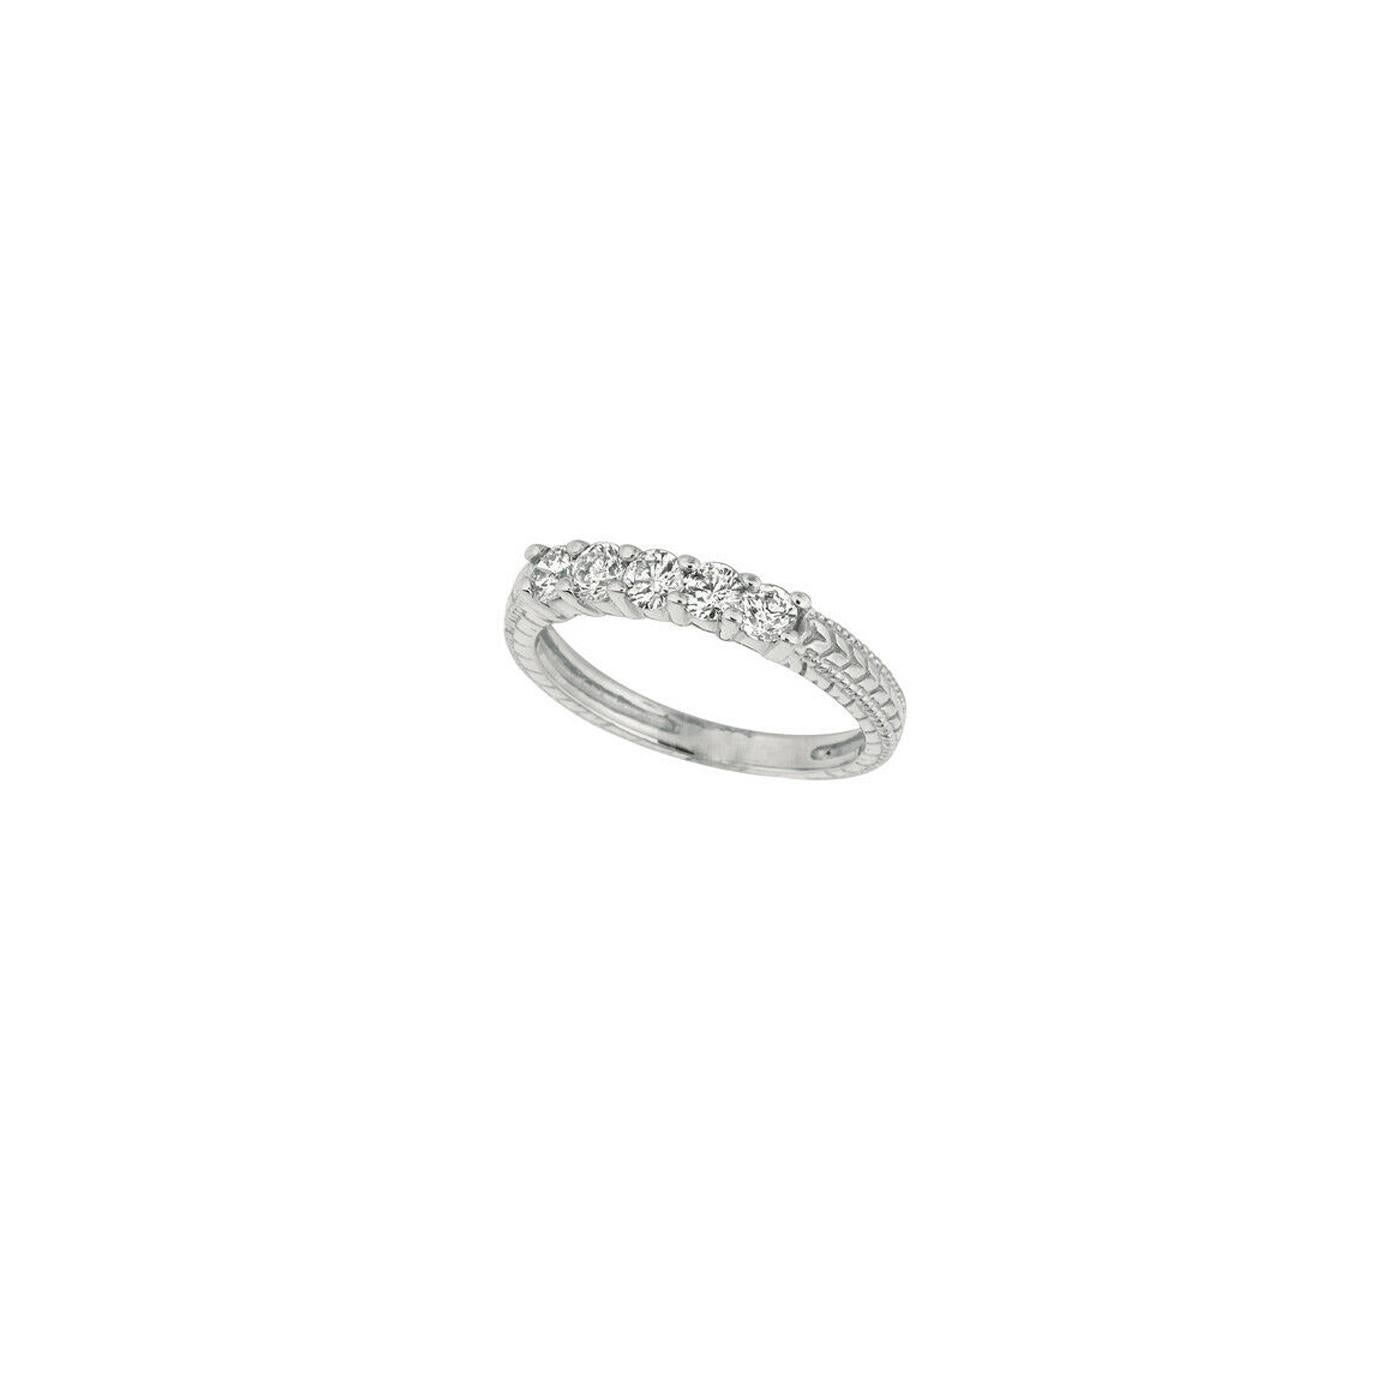 For Sale:  1.00 Carat Natural 5 Stone Diamond Ring Band 14K White Gold 2